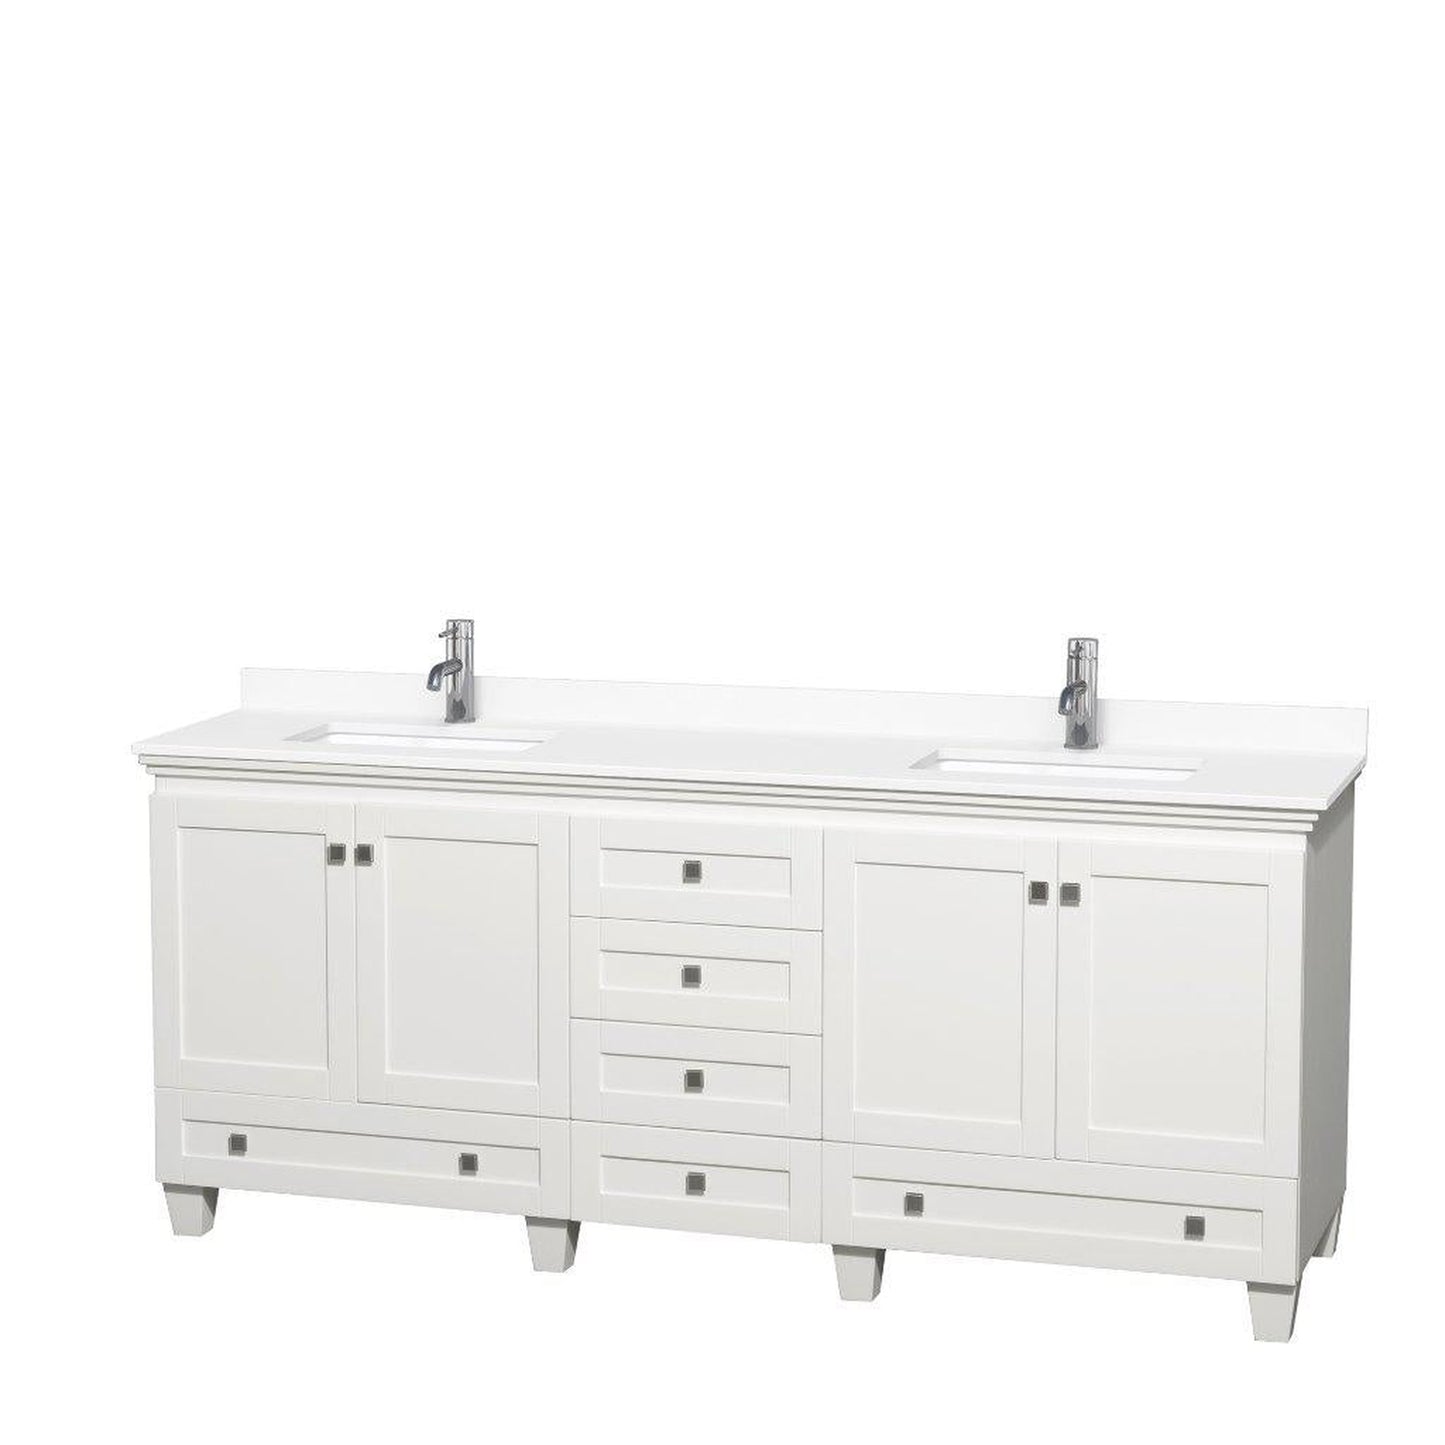 Wyndham Collection Acclaim 80" Double Bathroom White Vanity With White Cultured Marble Countertop And Undermount Square Sinks